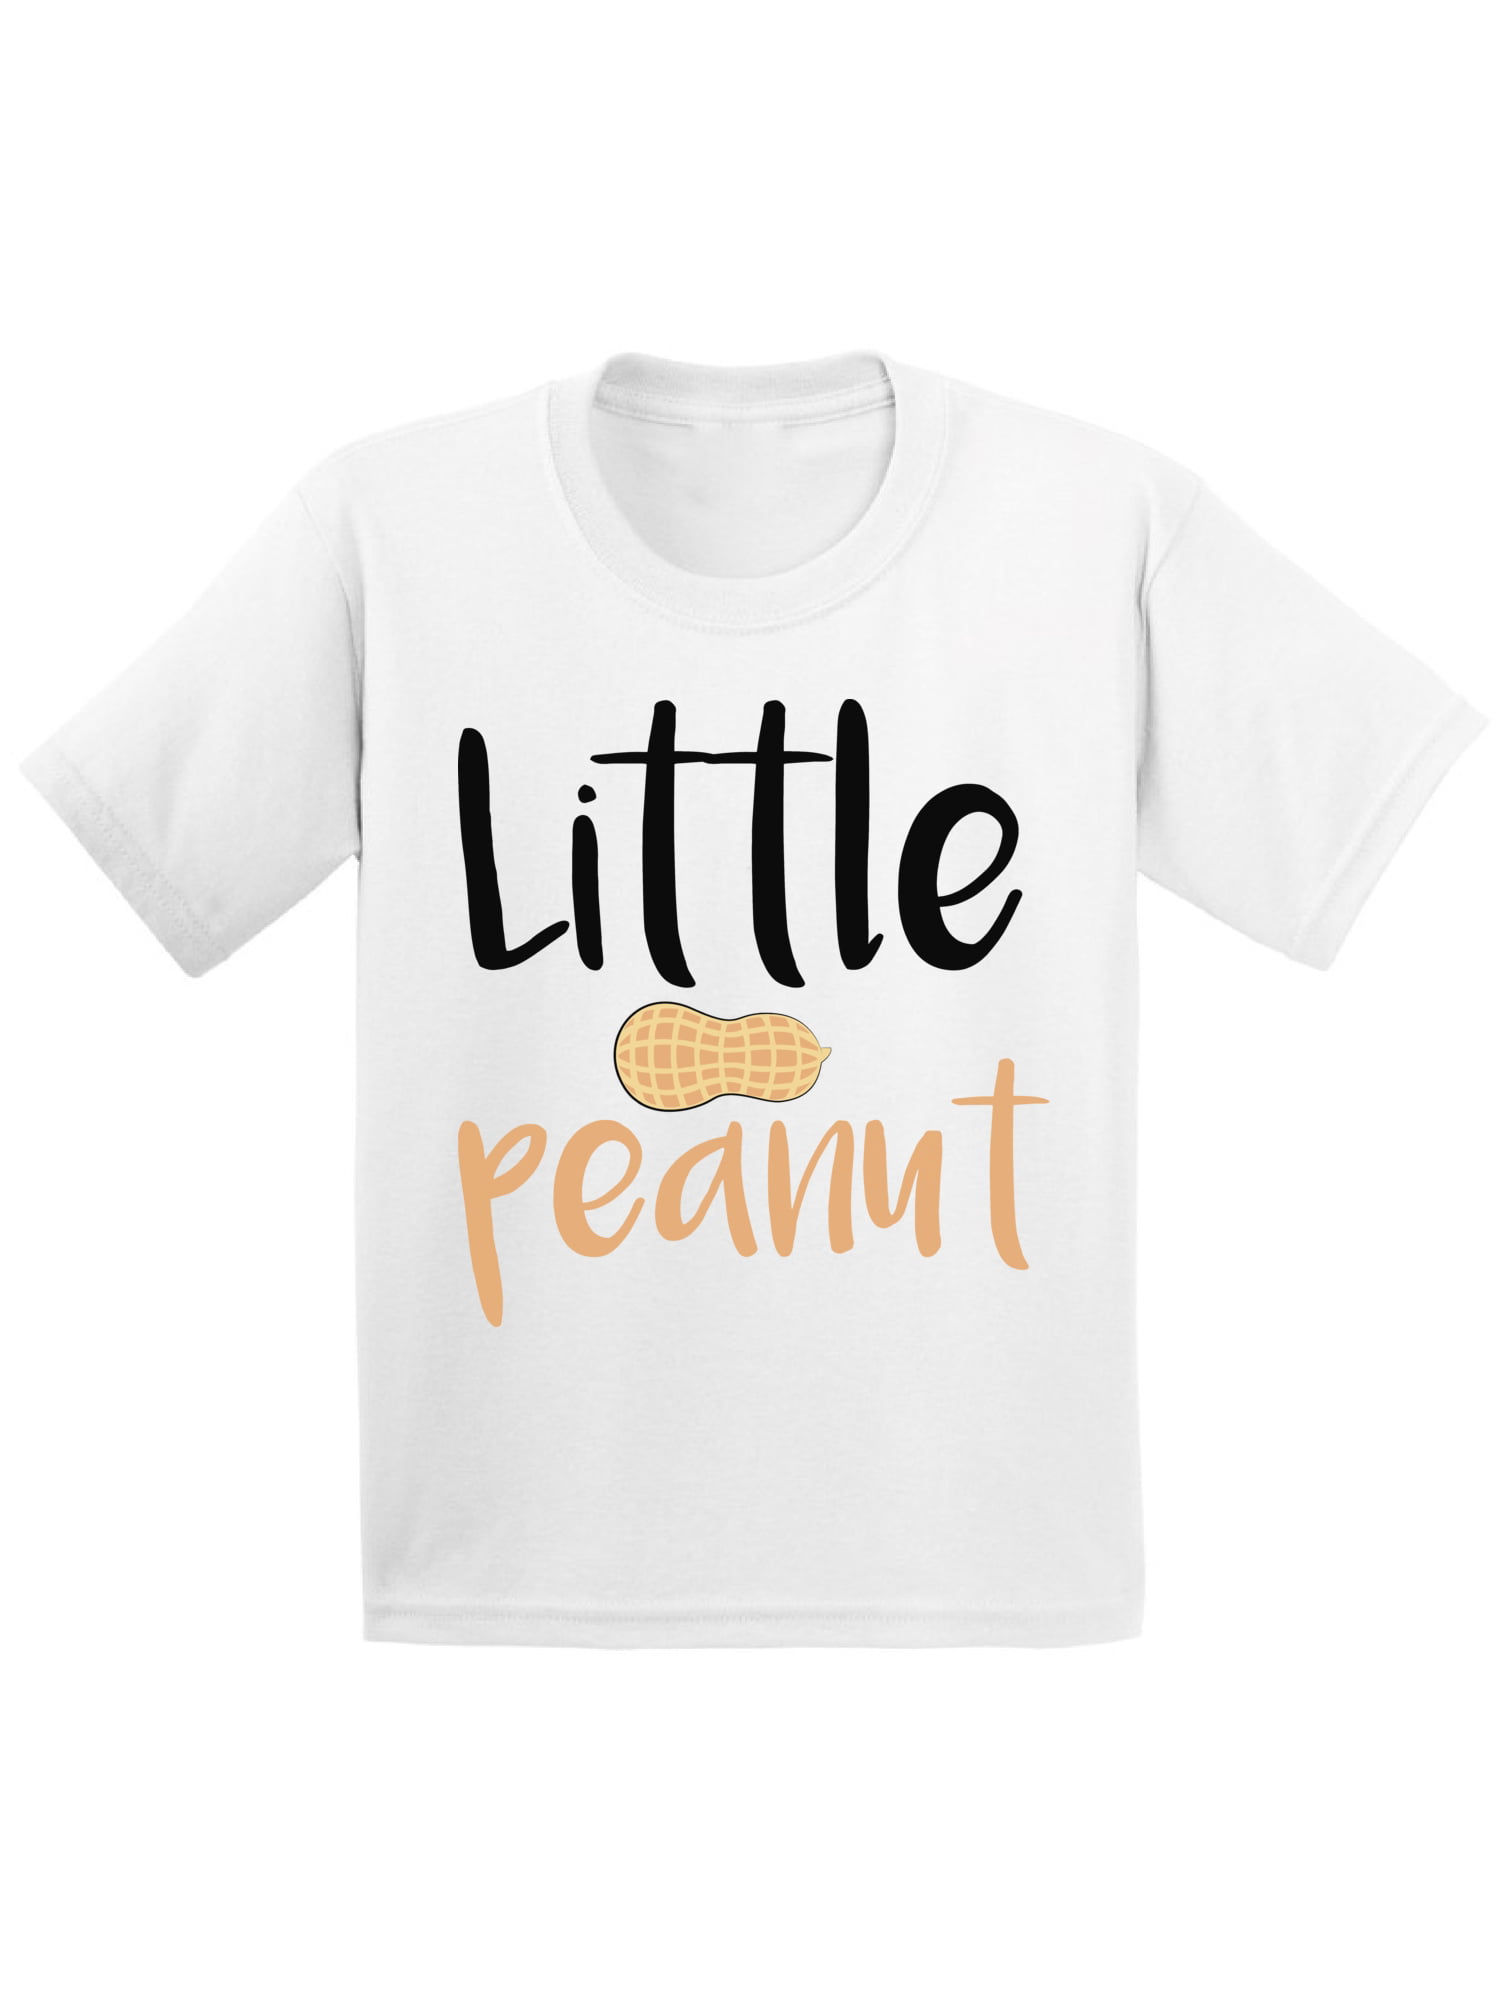 Peanut Clothes Collection Peanut Shirt for Girls Little Peanut Youth T Shirt Baby Items Little Peanut Cute Shirt for Boys Kids Outfit.